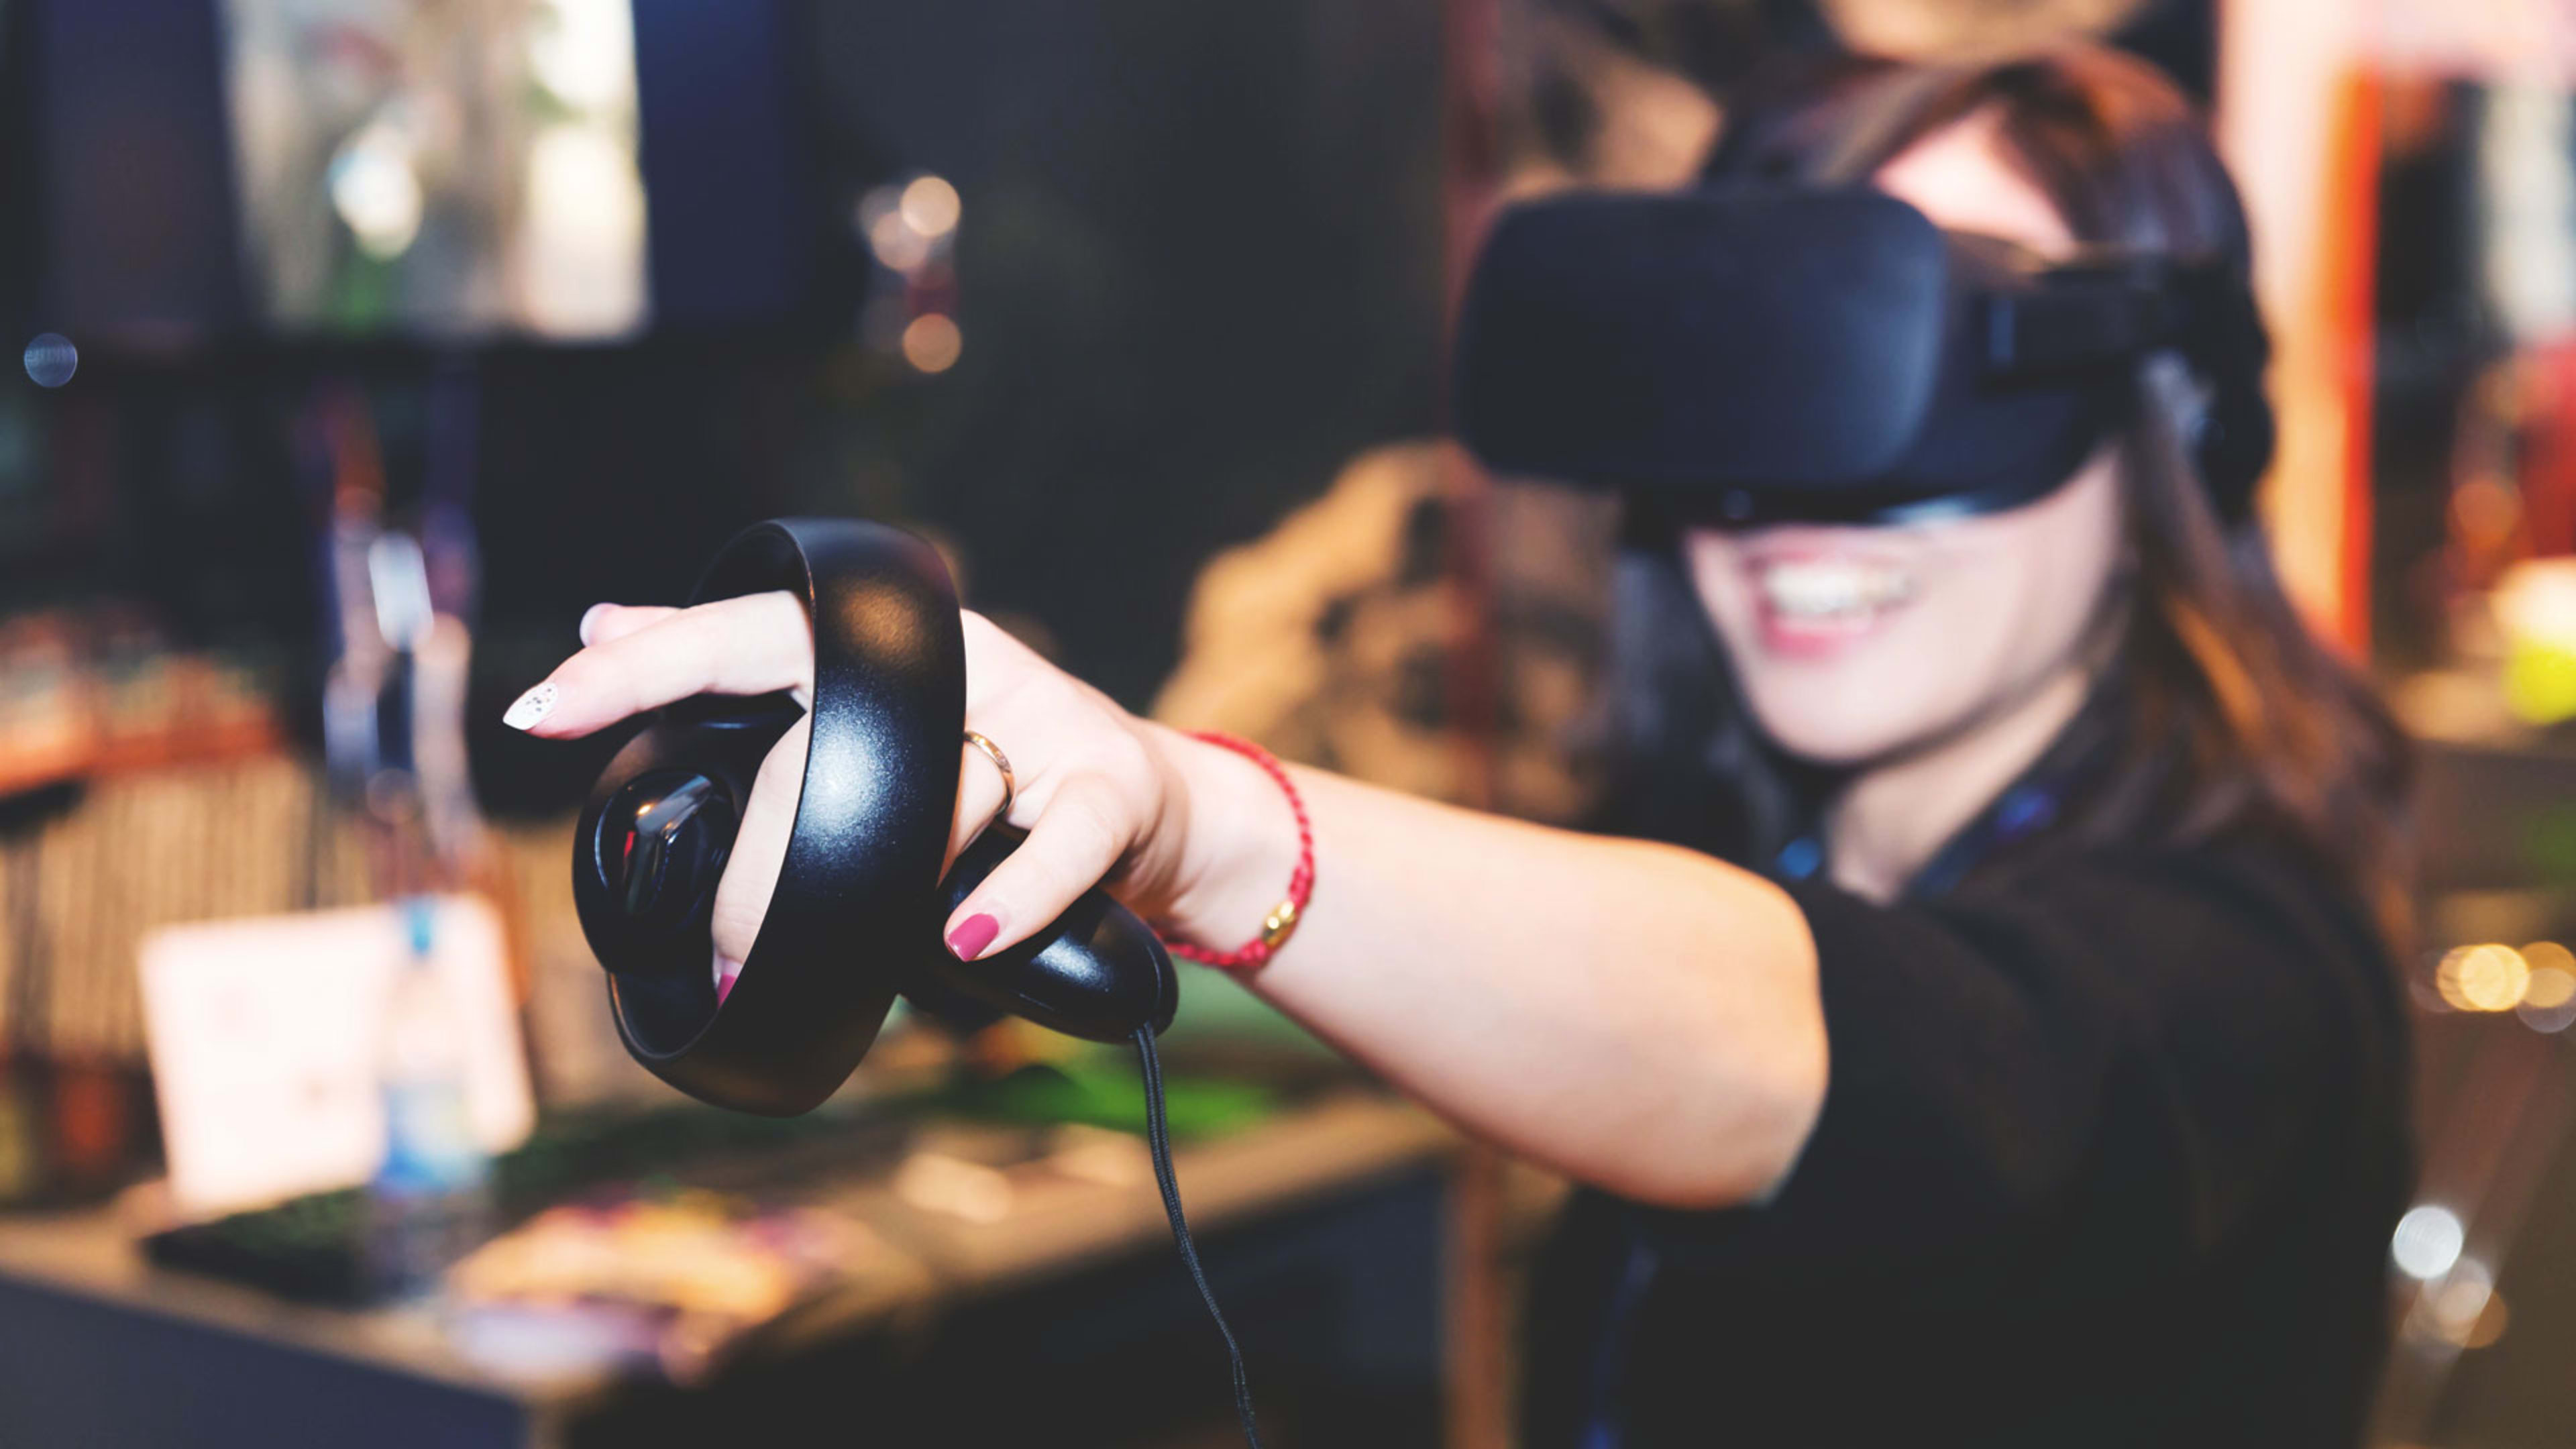 In Bid To Boost Popularity, Oculus Slashes Rift and Touch Price By $200 (Again)